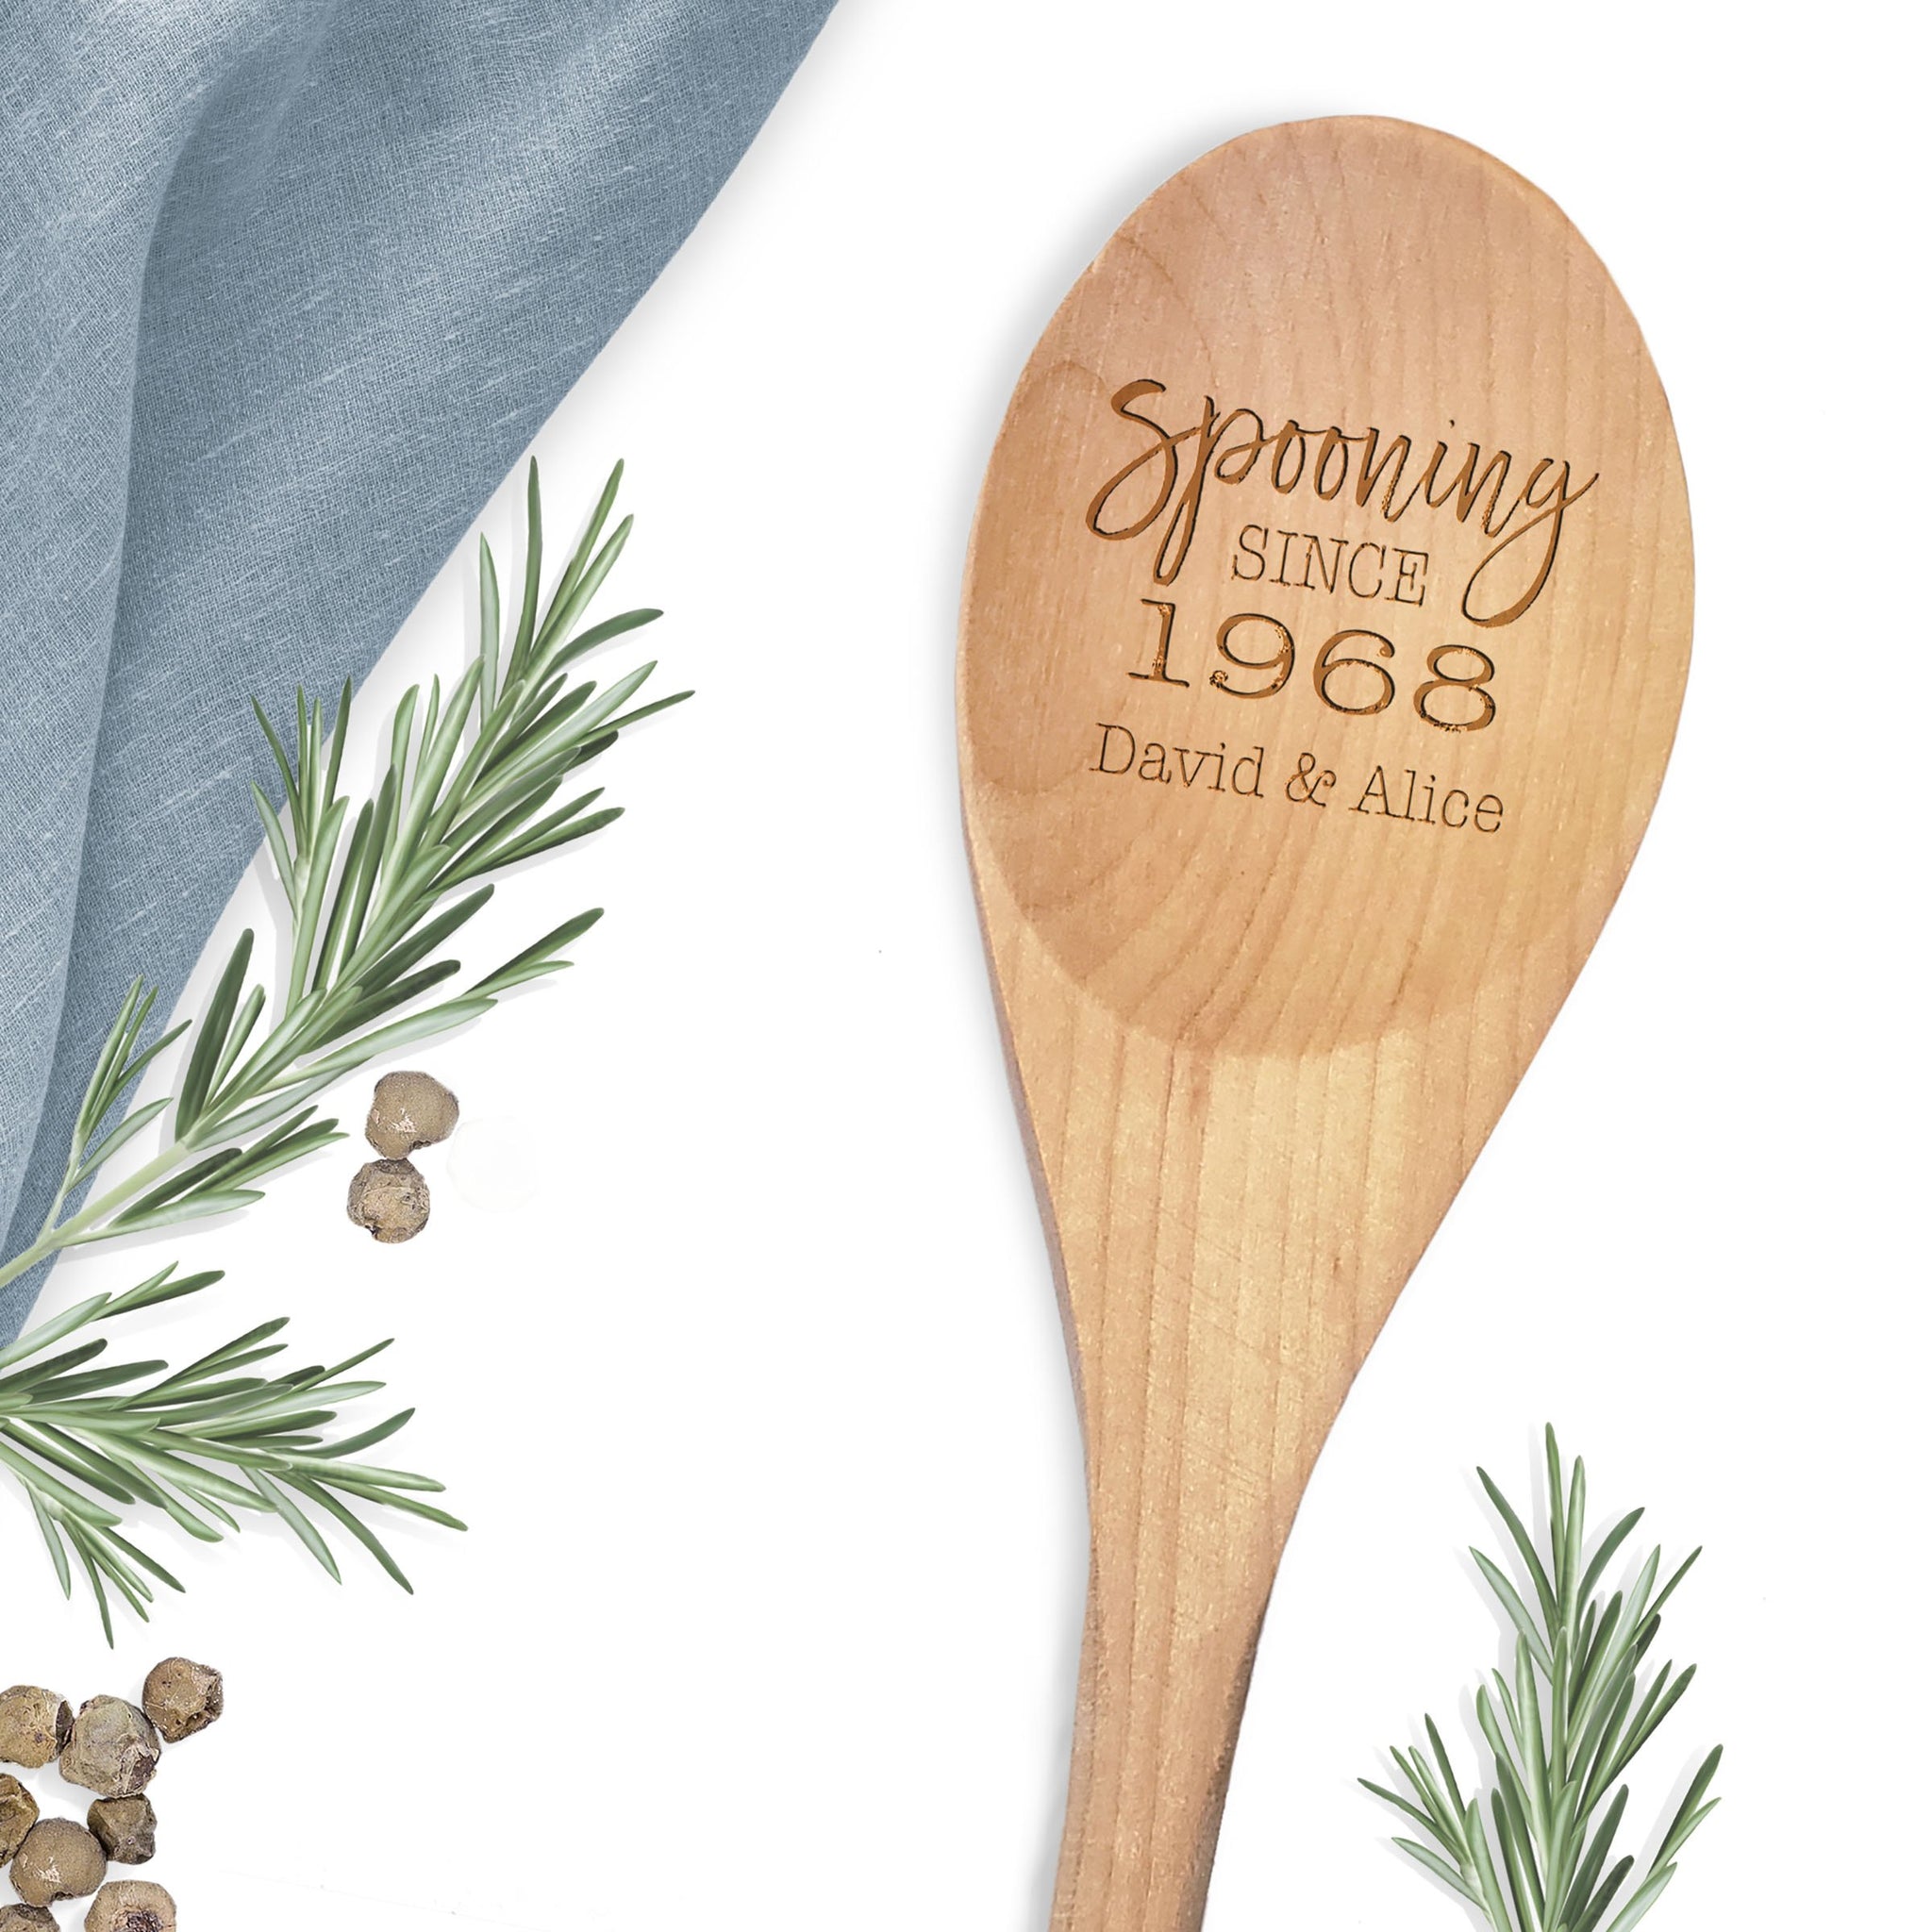 Personalized Wooden Spoon, Baking Gifts, Cooking Gift, 60th